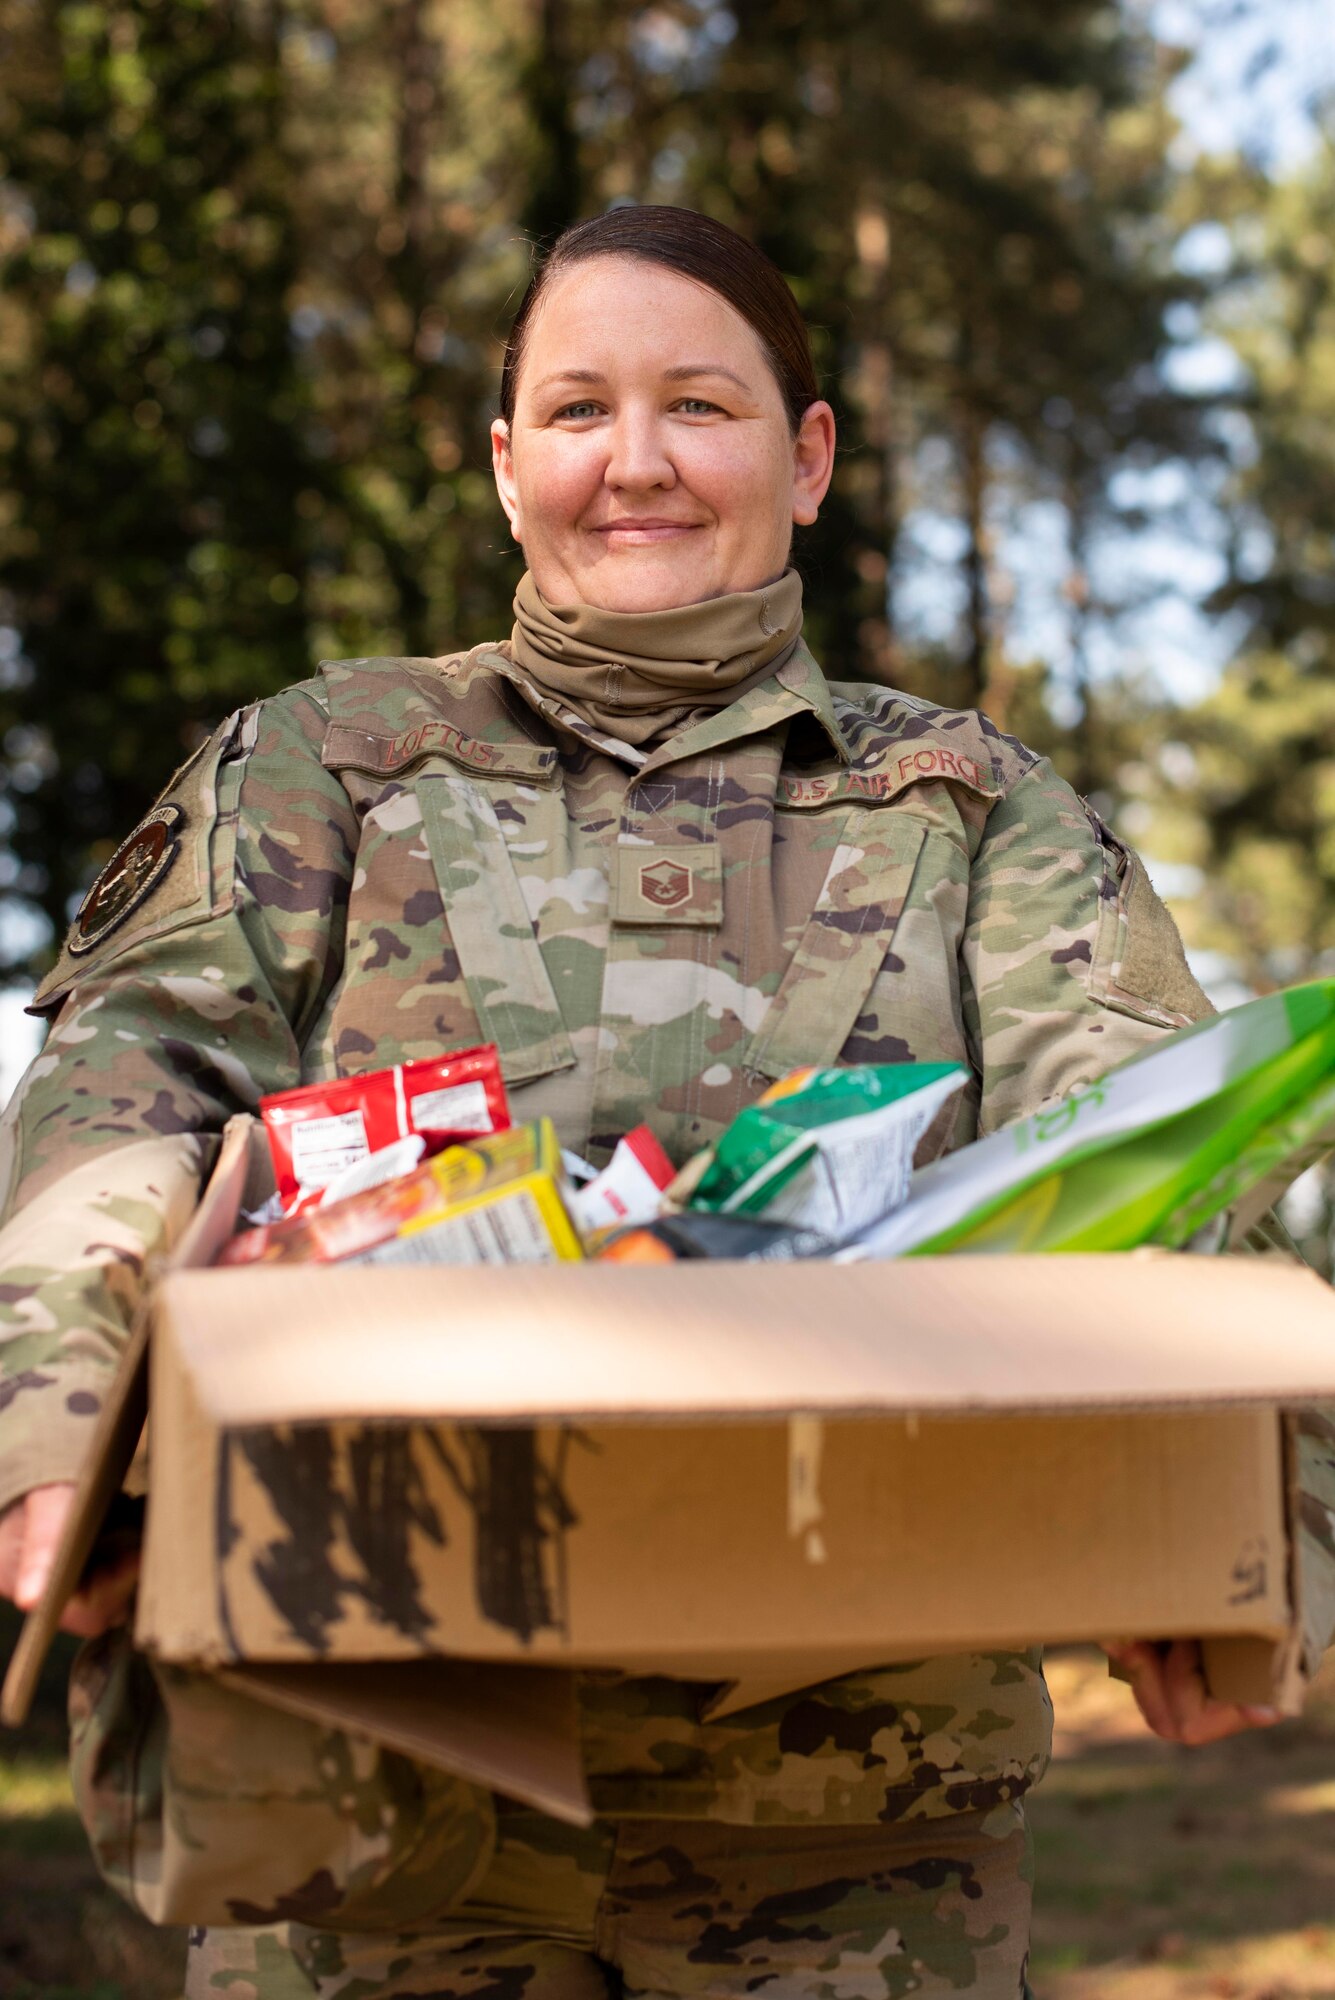 Master Sgt. Aisling Loftus, 100th Force Support Squadron postal superintendent, with a care package she assembled at RAF Mildenhall, England, June 15, 2020. Team Mildenhall has donated approximately 3,000 items to support the wellness of local healthcare workers fighting COVID-19. (U.S. Air Force photo by Airman 1st Class Joseph Barron)